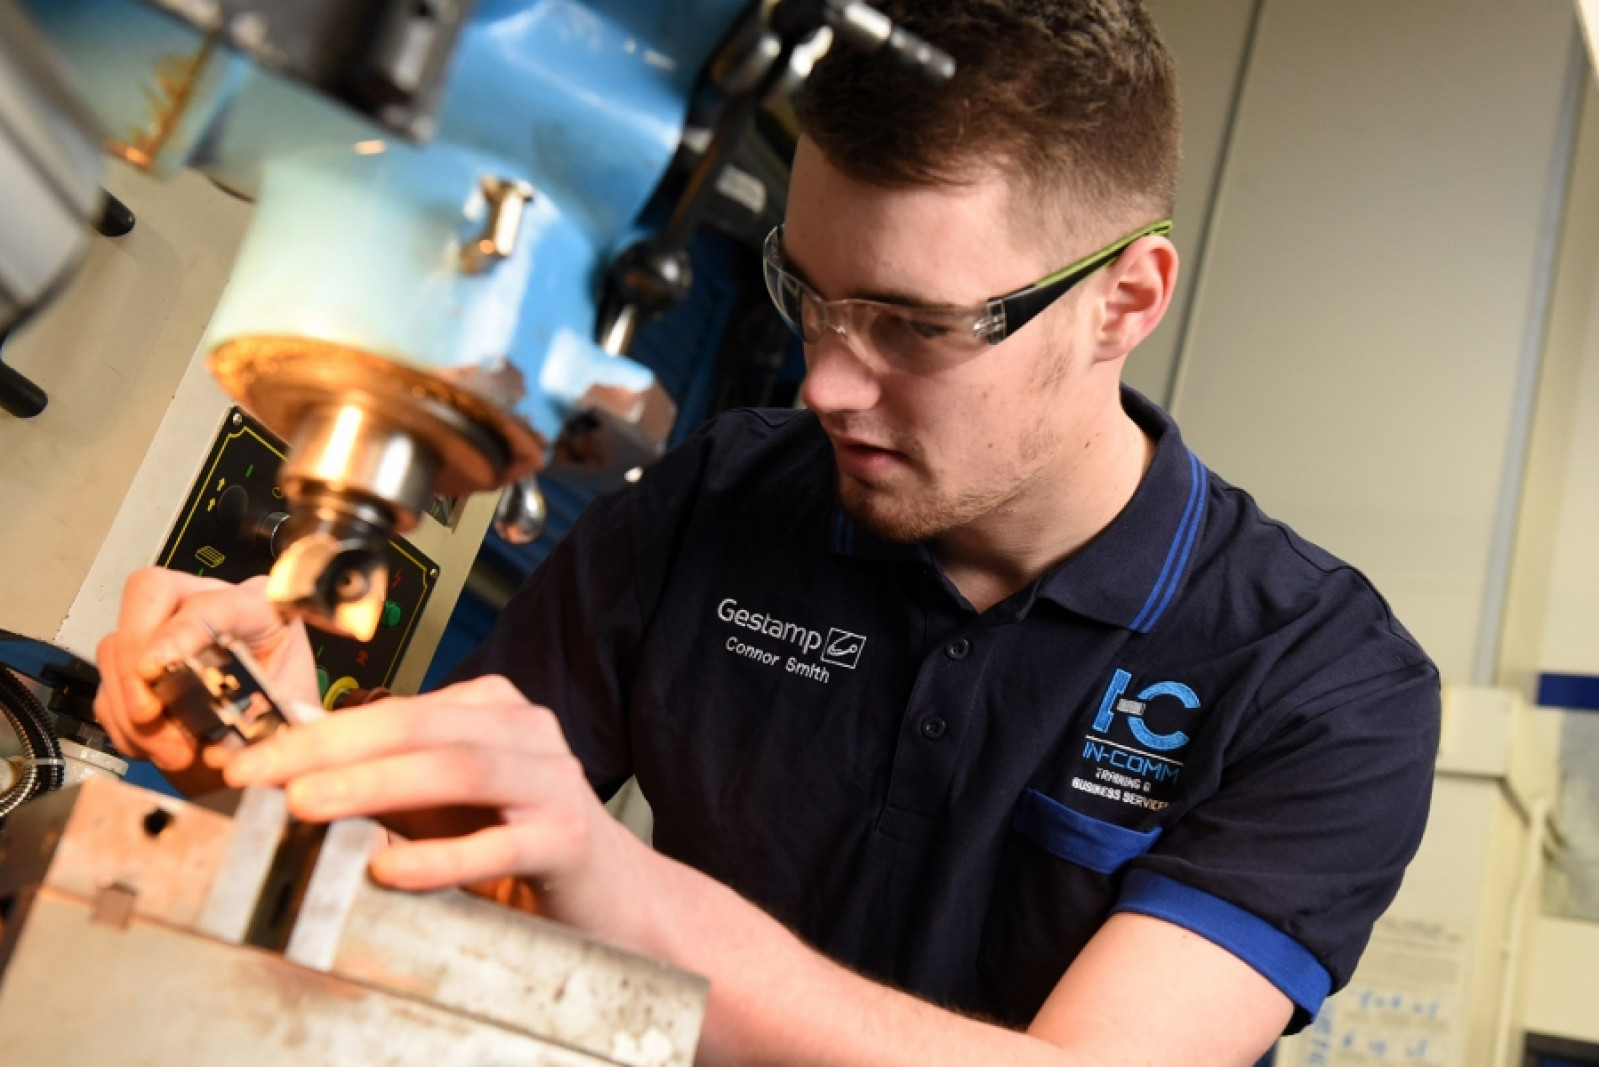 Manufacturers split on the benefits of the Apprenticeship Levy according to new report